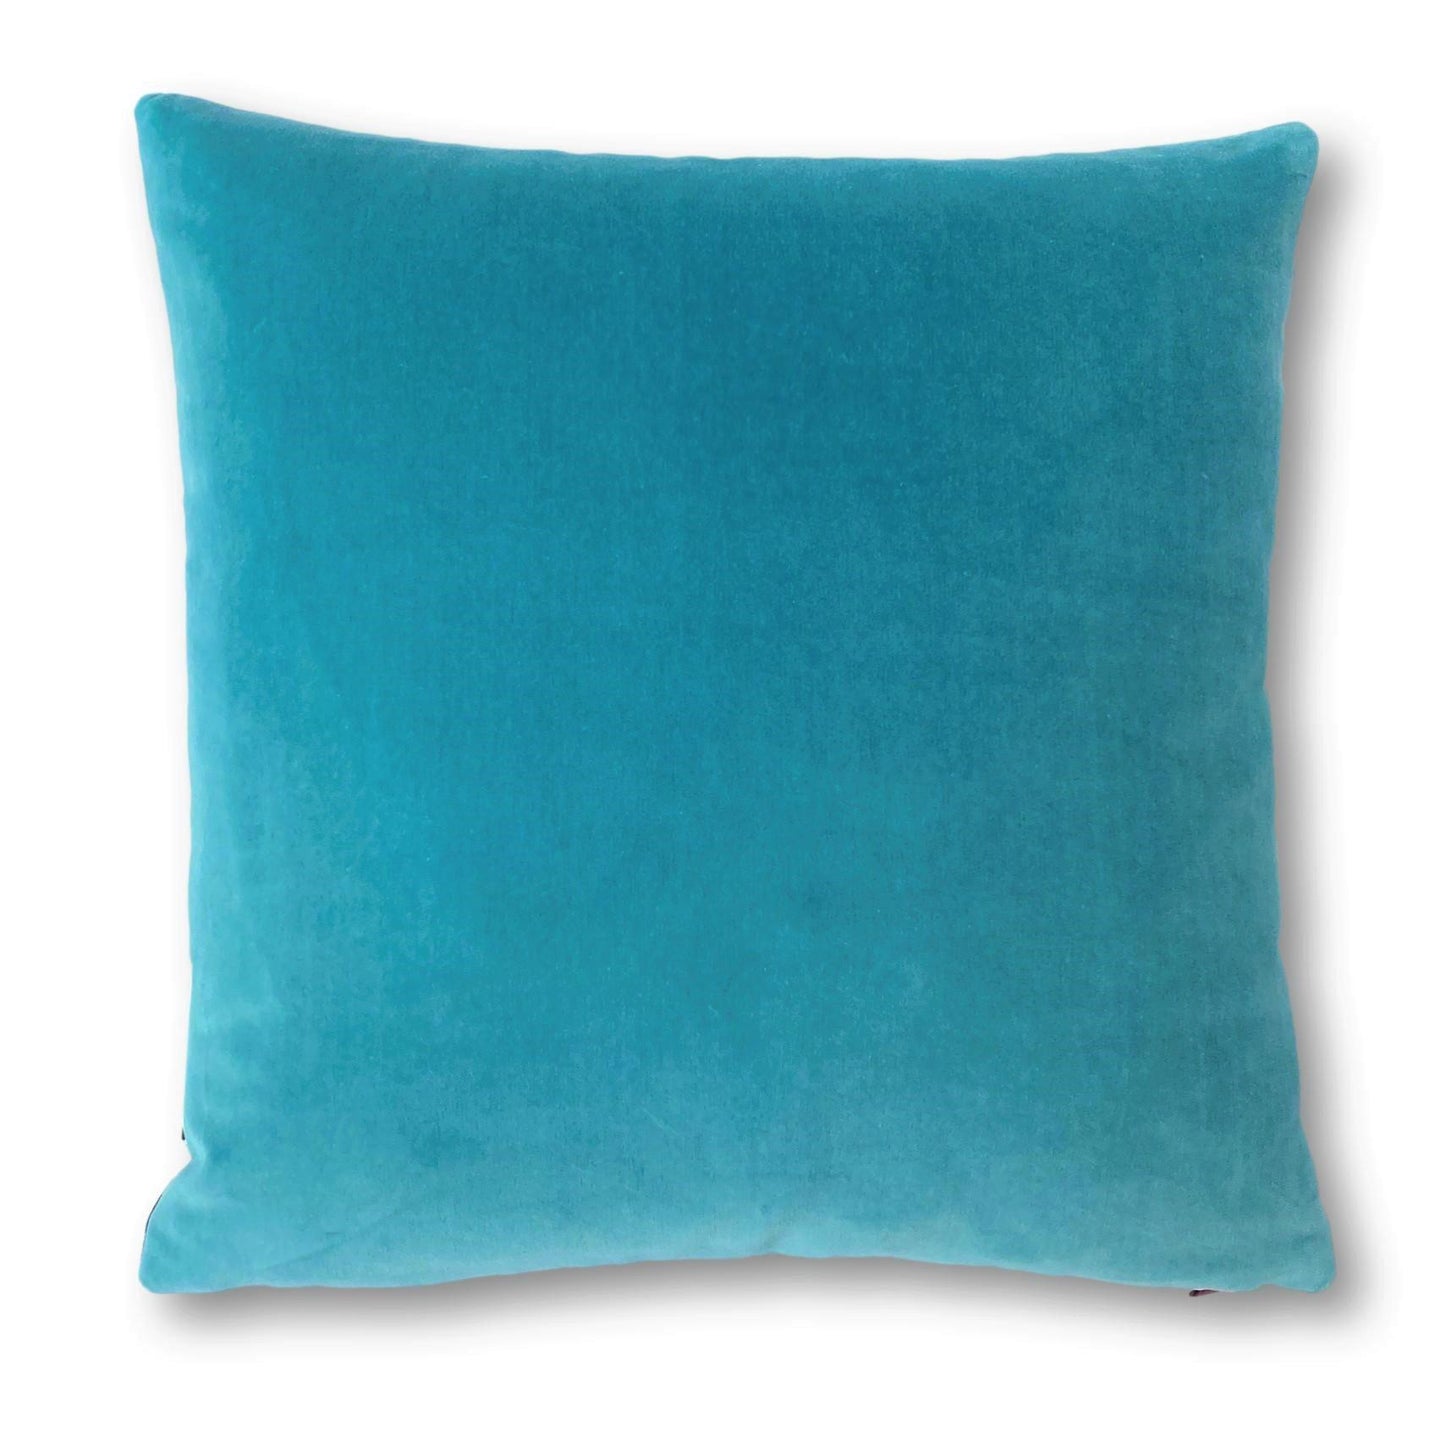 Turquoise Velvet Cushion Cover with Blush Pink